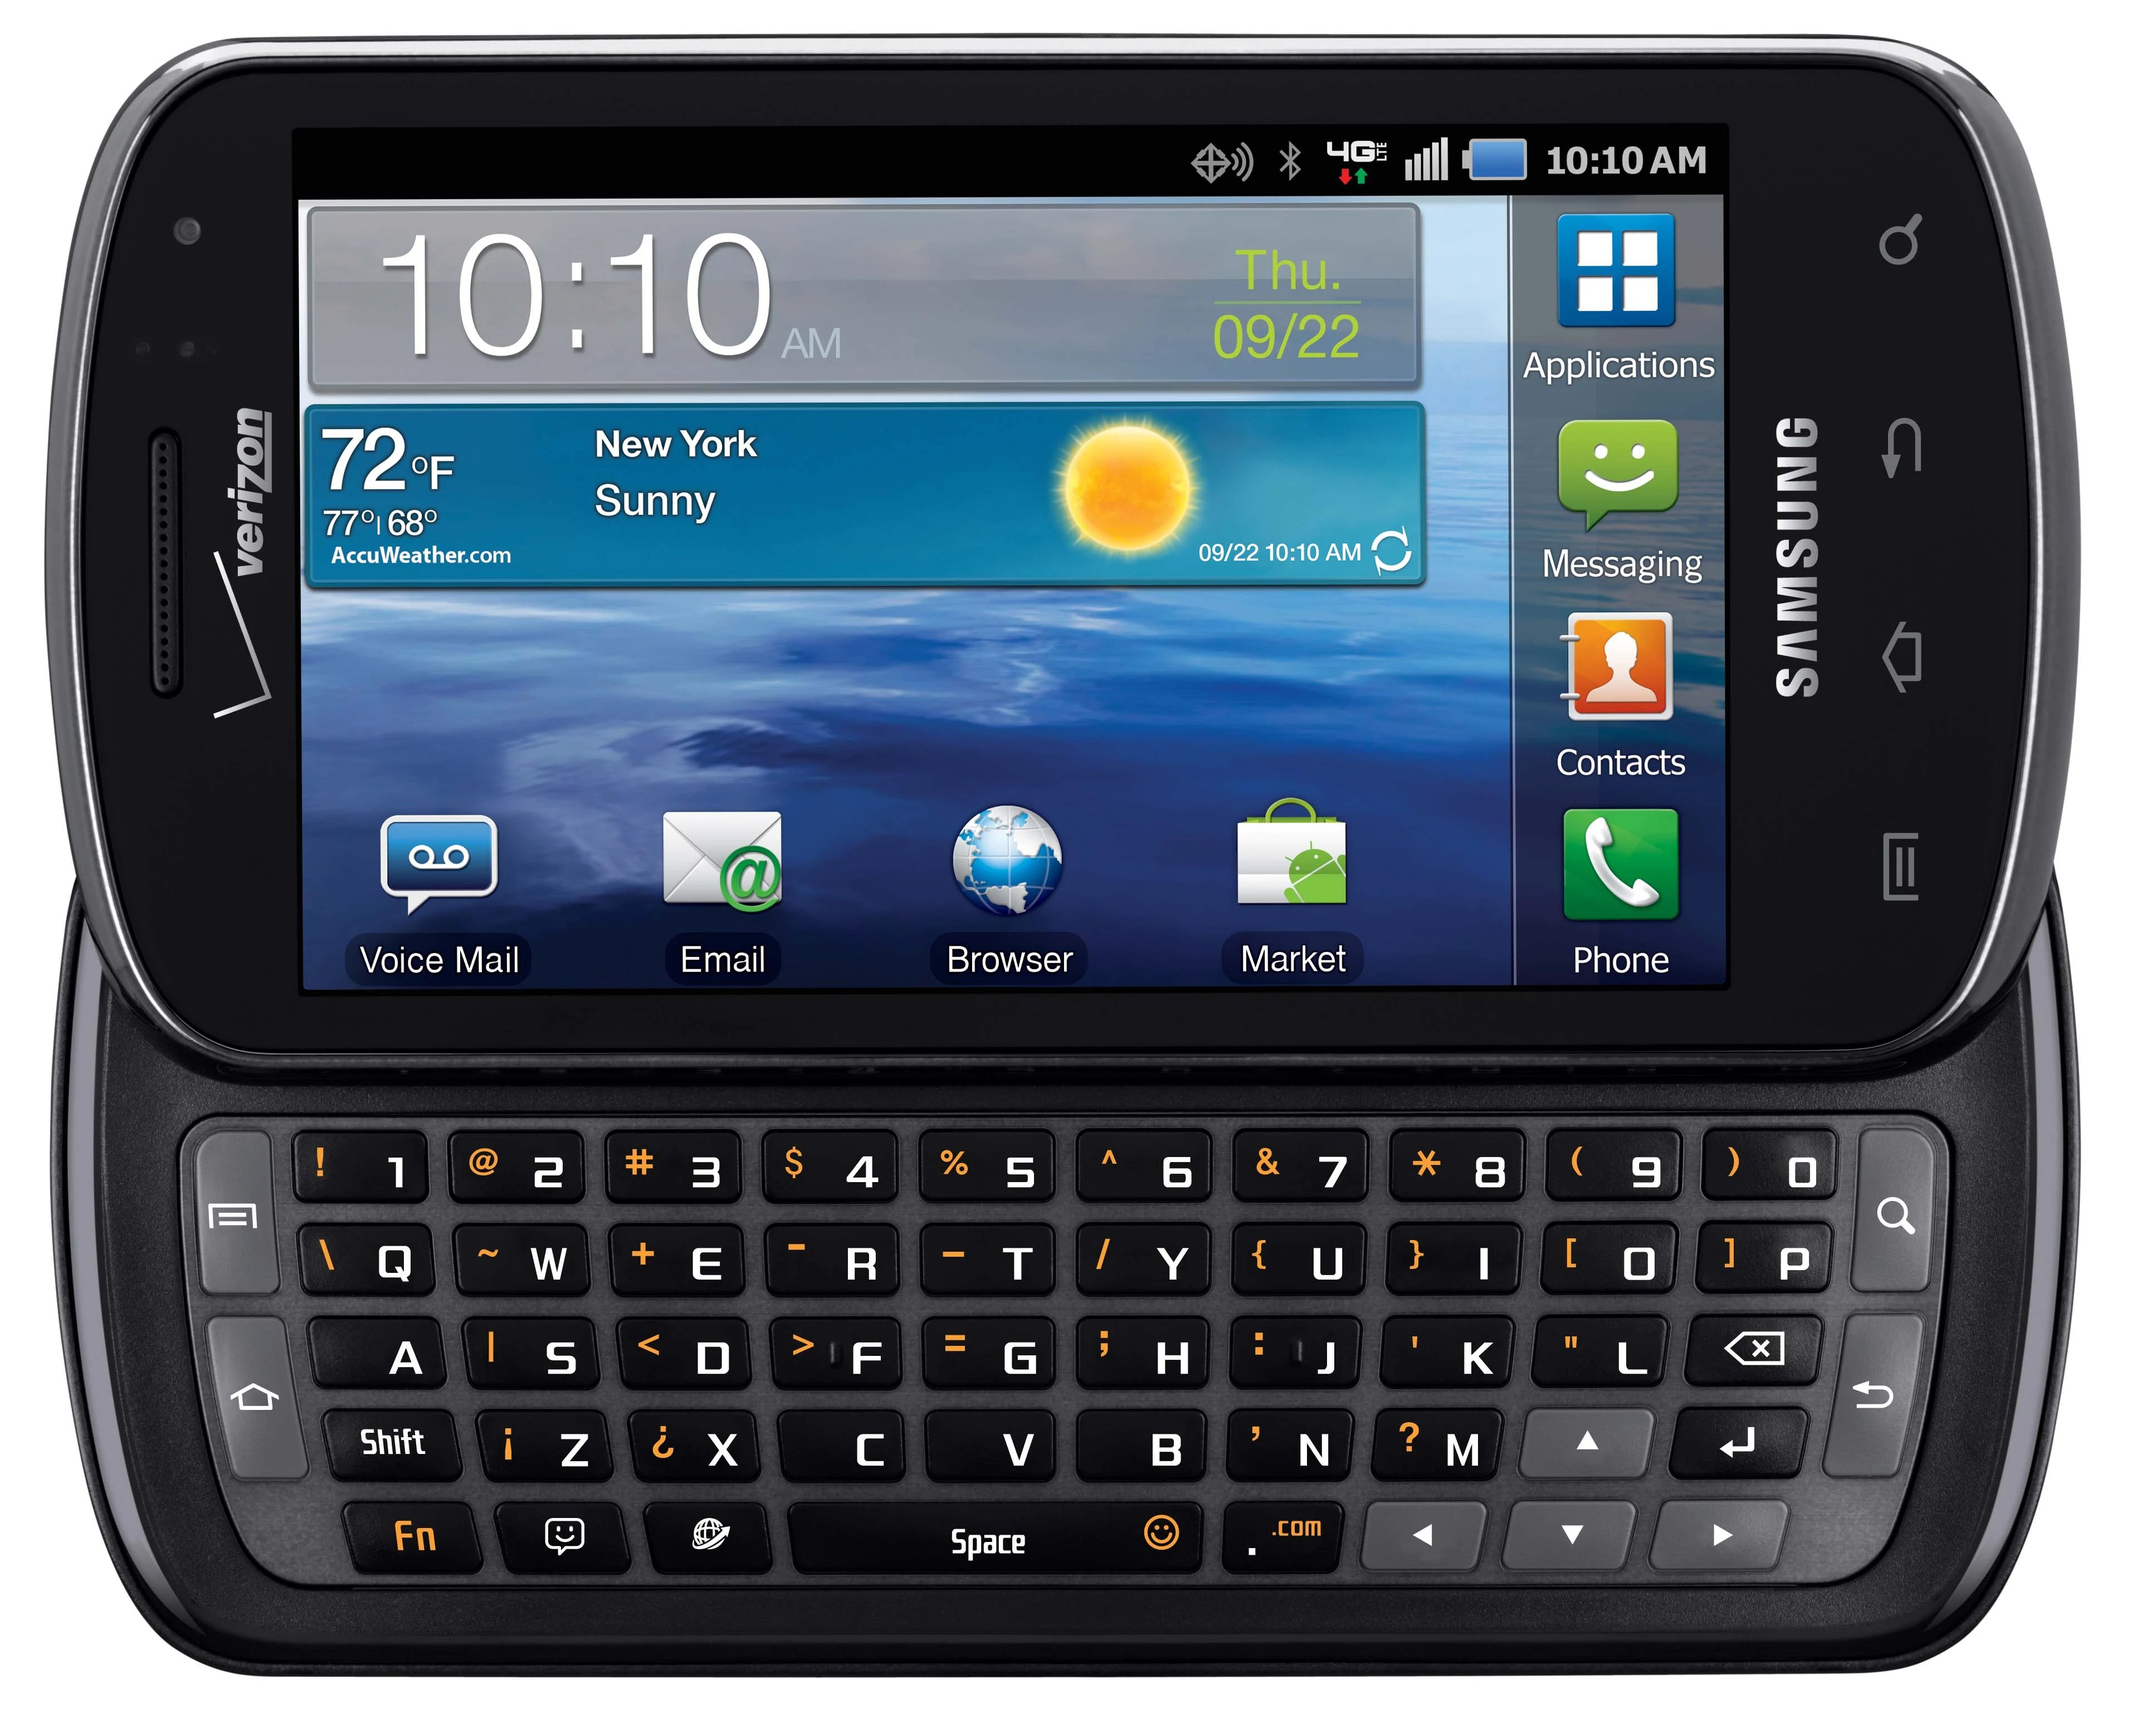 Samsung Stratosphere, Verizon’s first QWERTY LTE phone, coming October